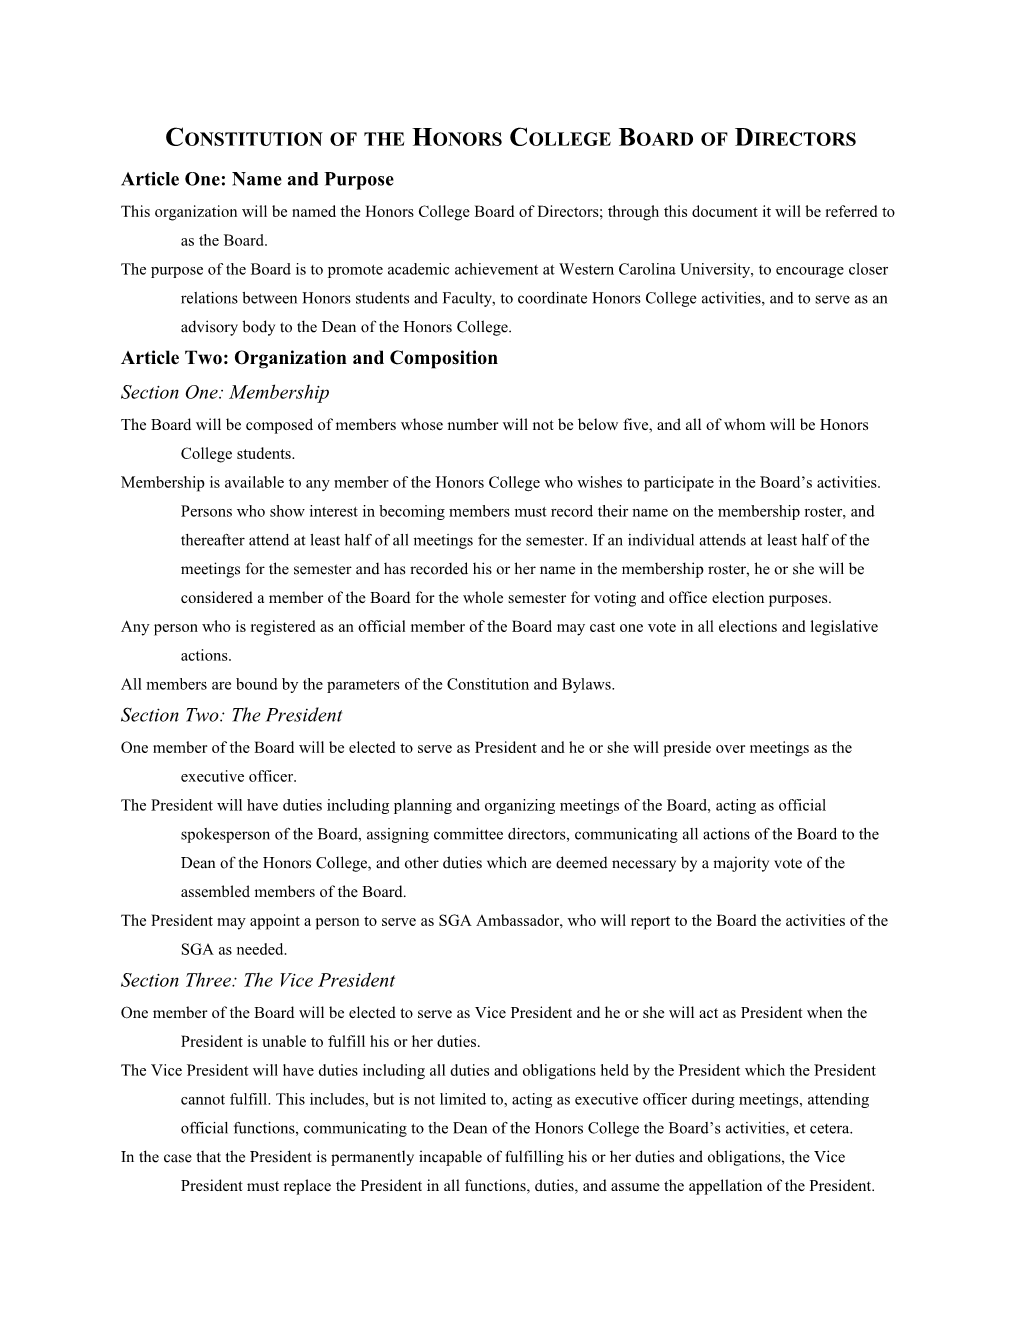 Constitution of the Honors College Board of Directors